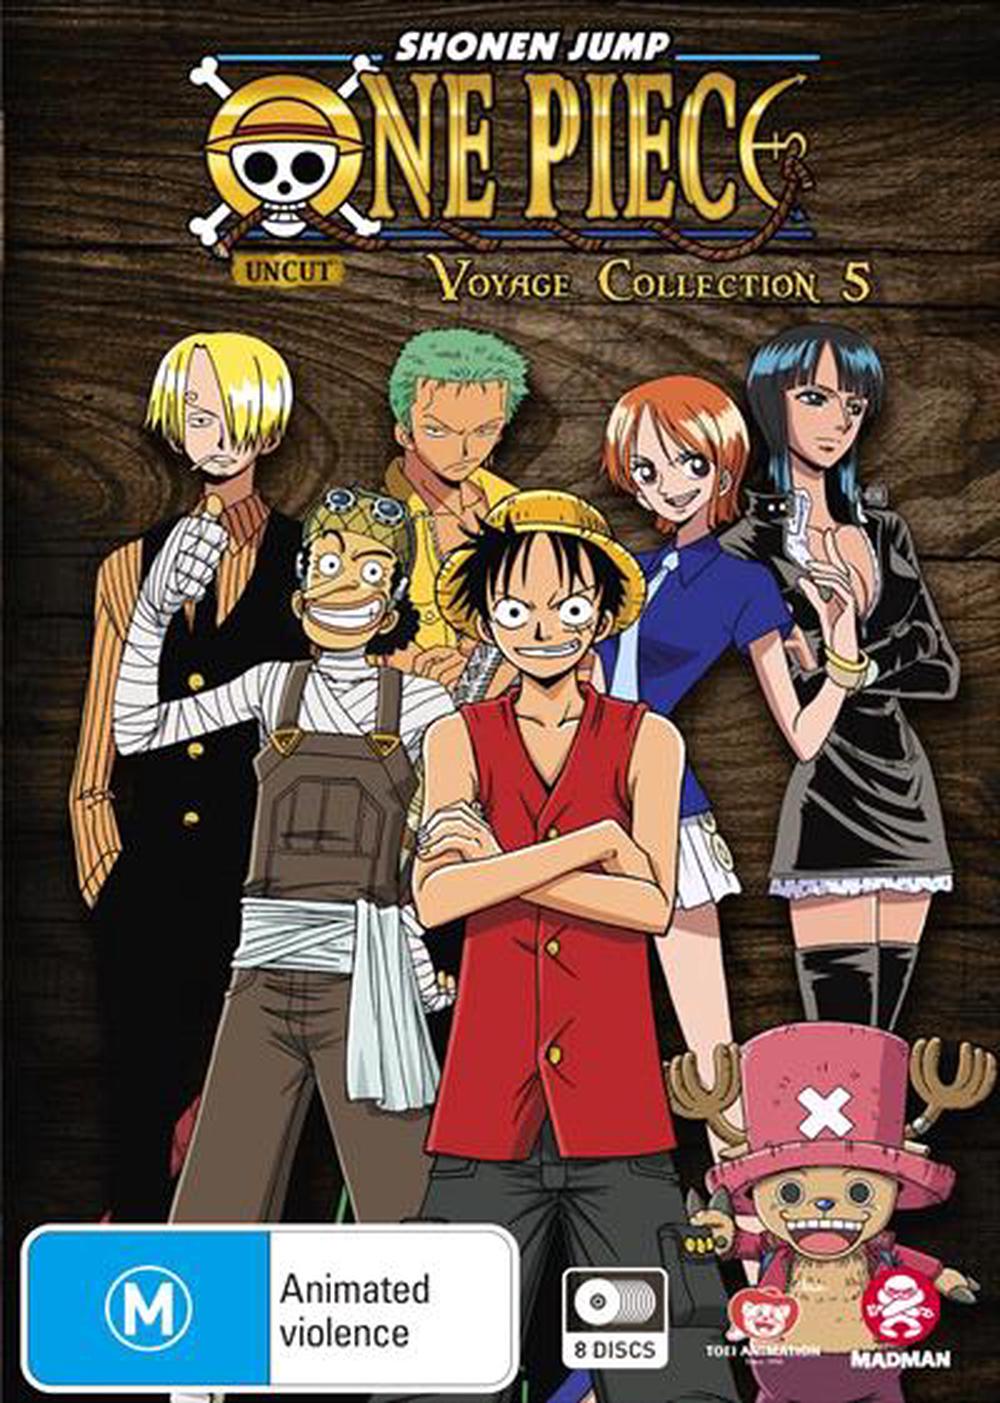 One Piece Voyage Collection 5 Eps 206 252 Dvd Buy Online At